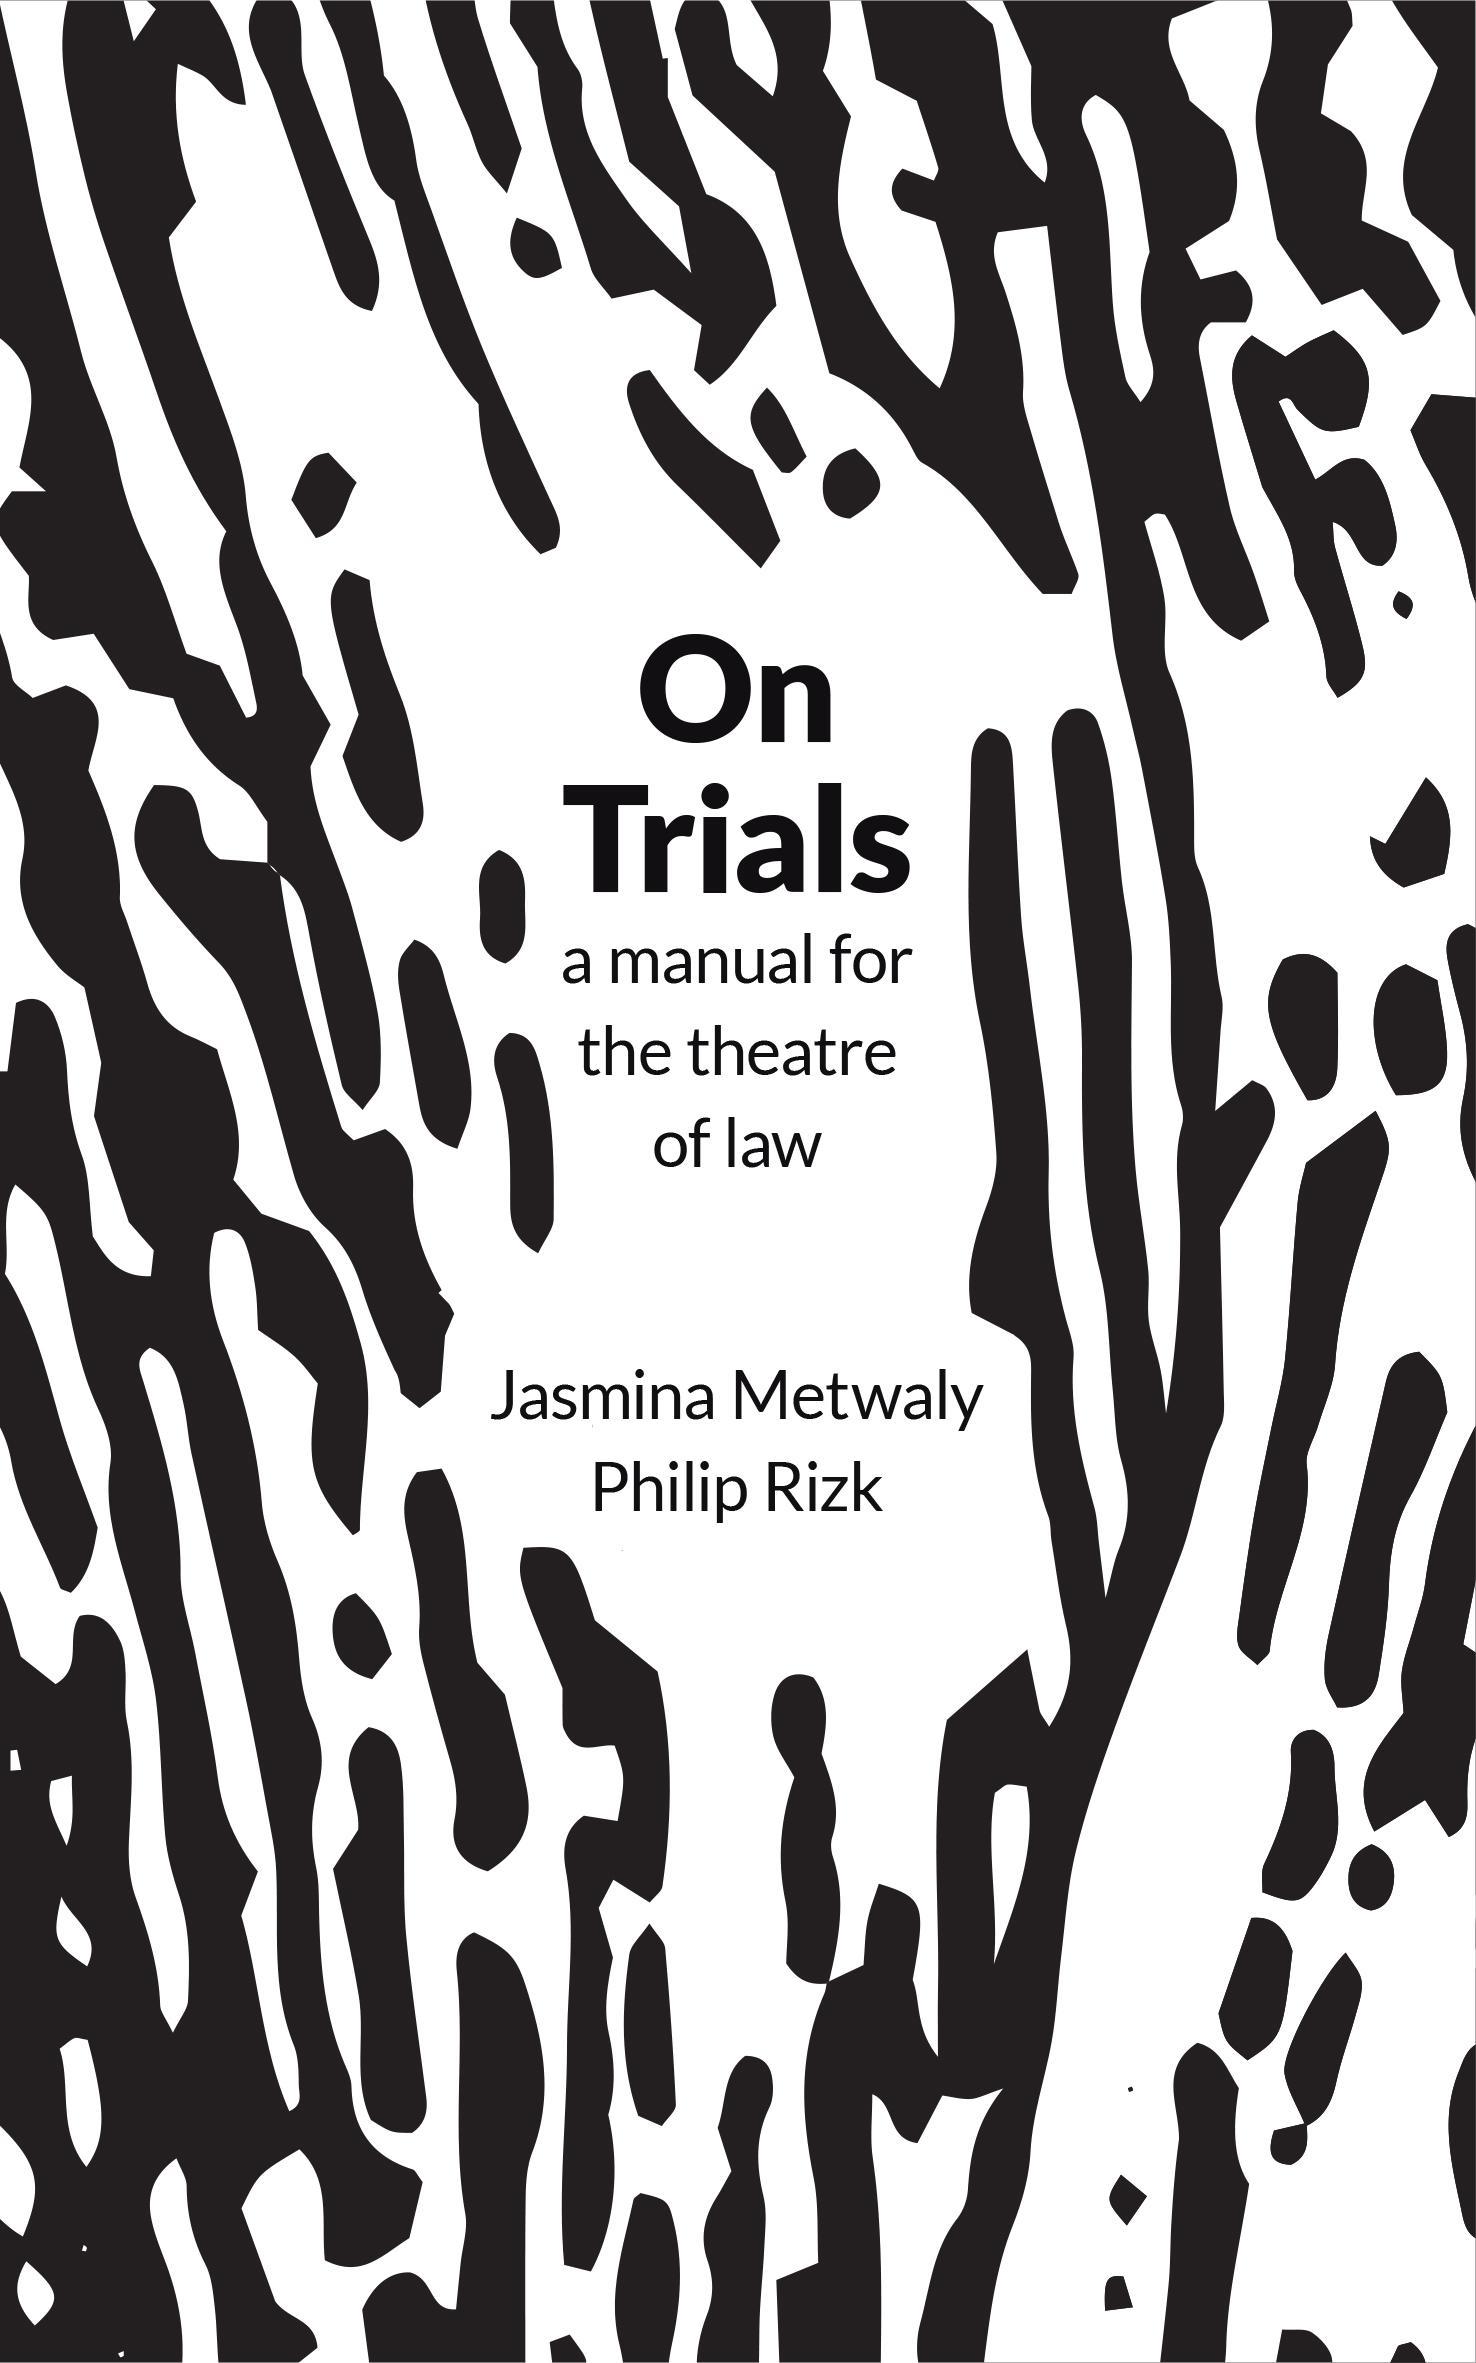 On Trials – A manual for the theatre of law